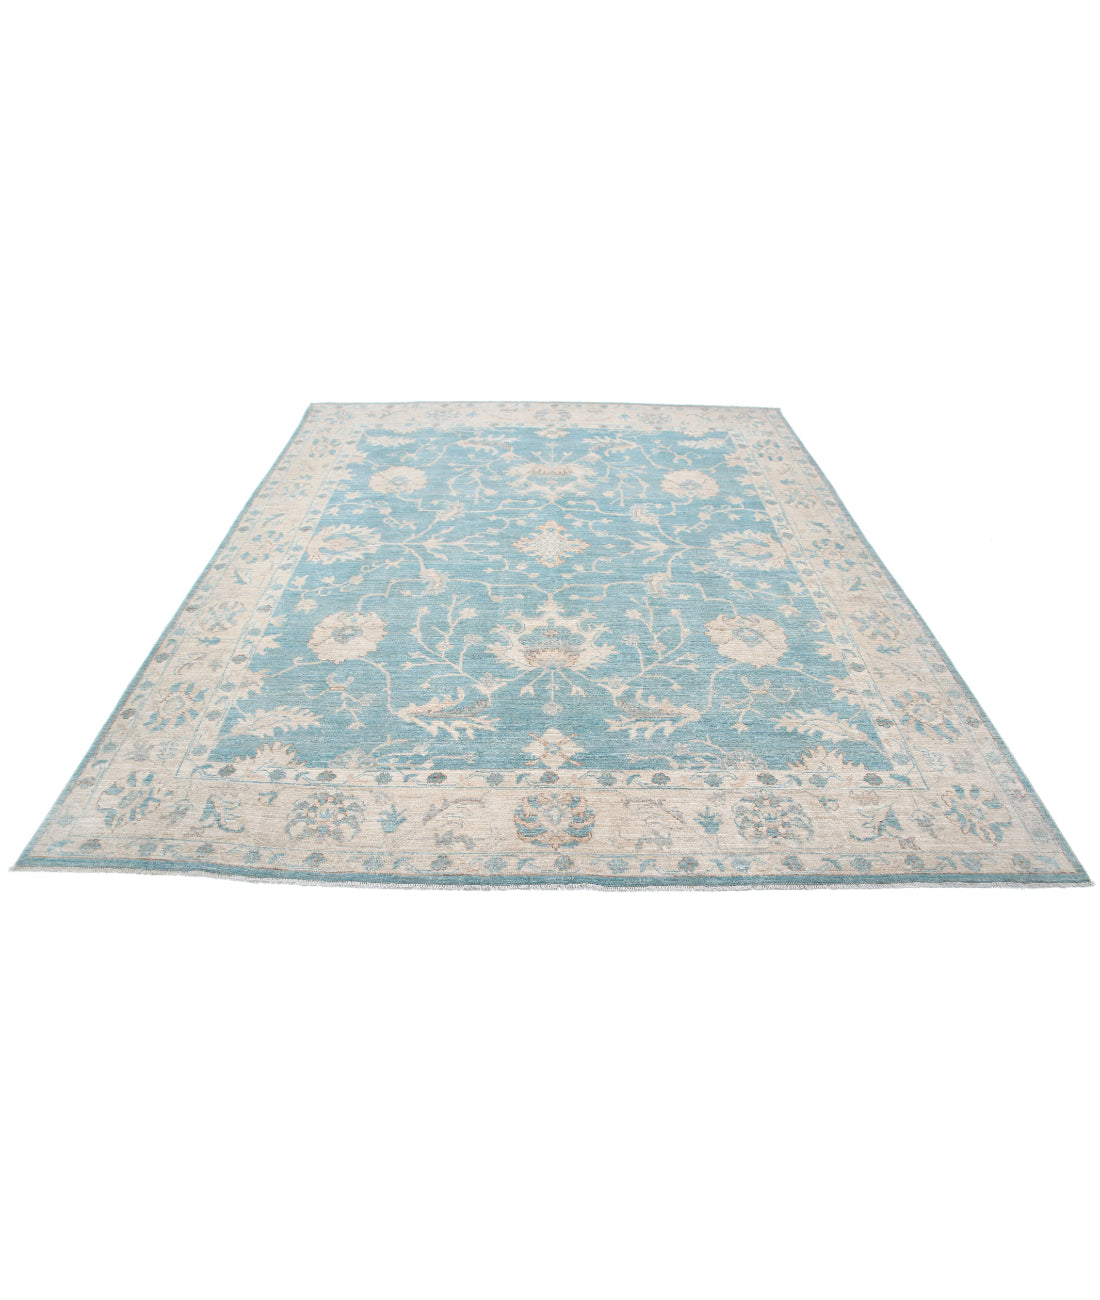 Hand Knotted Oushak Wool Rug - 7'11'' x 9'5'' 7'11'' x 9'5'' (238 X 283) / Green / Ivory